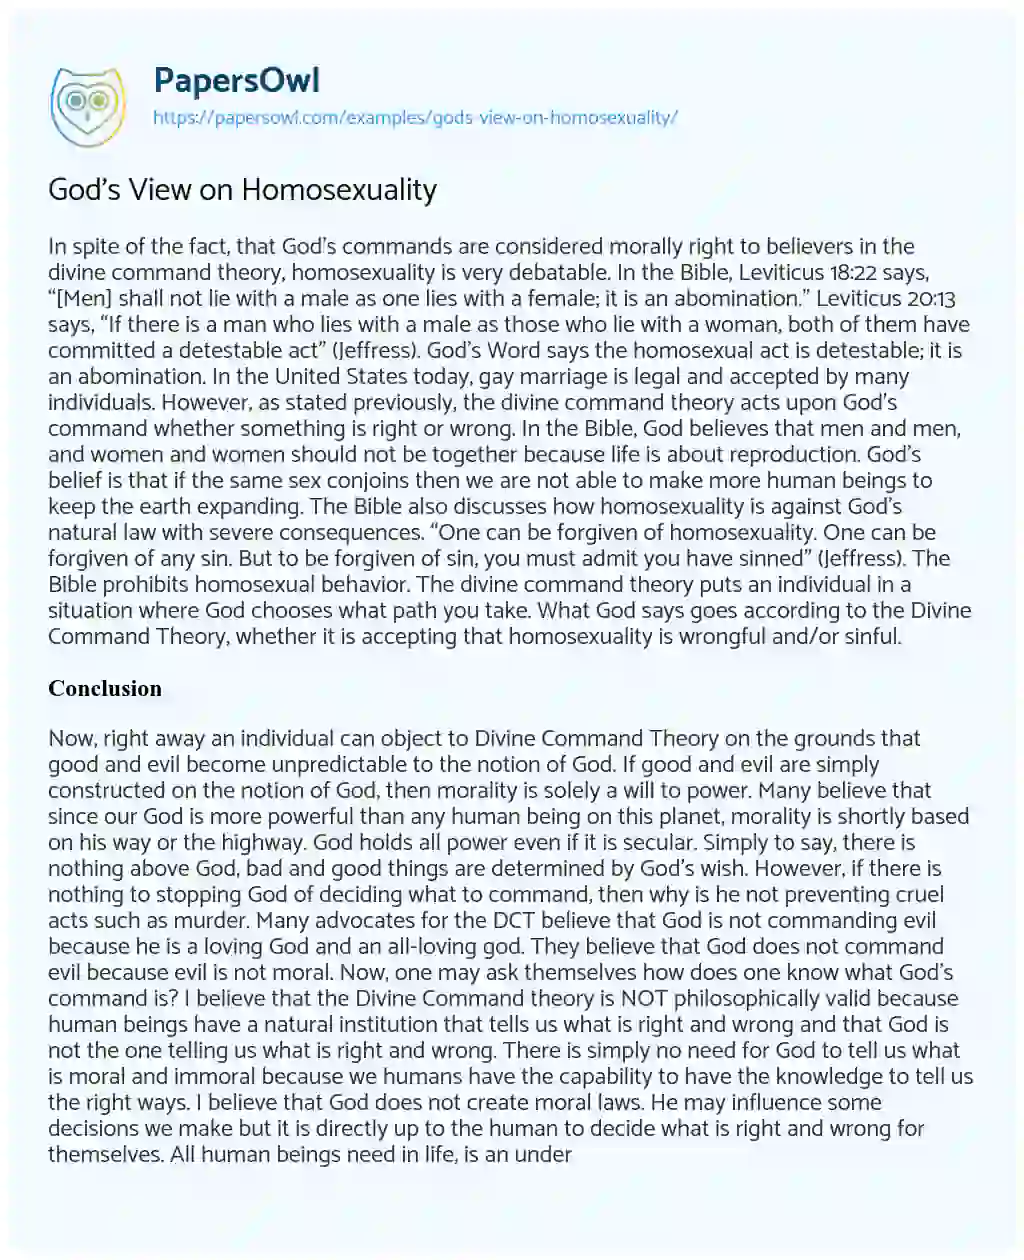 Essay on God’s View on Homosexuality